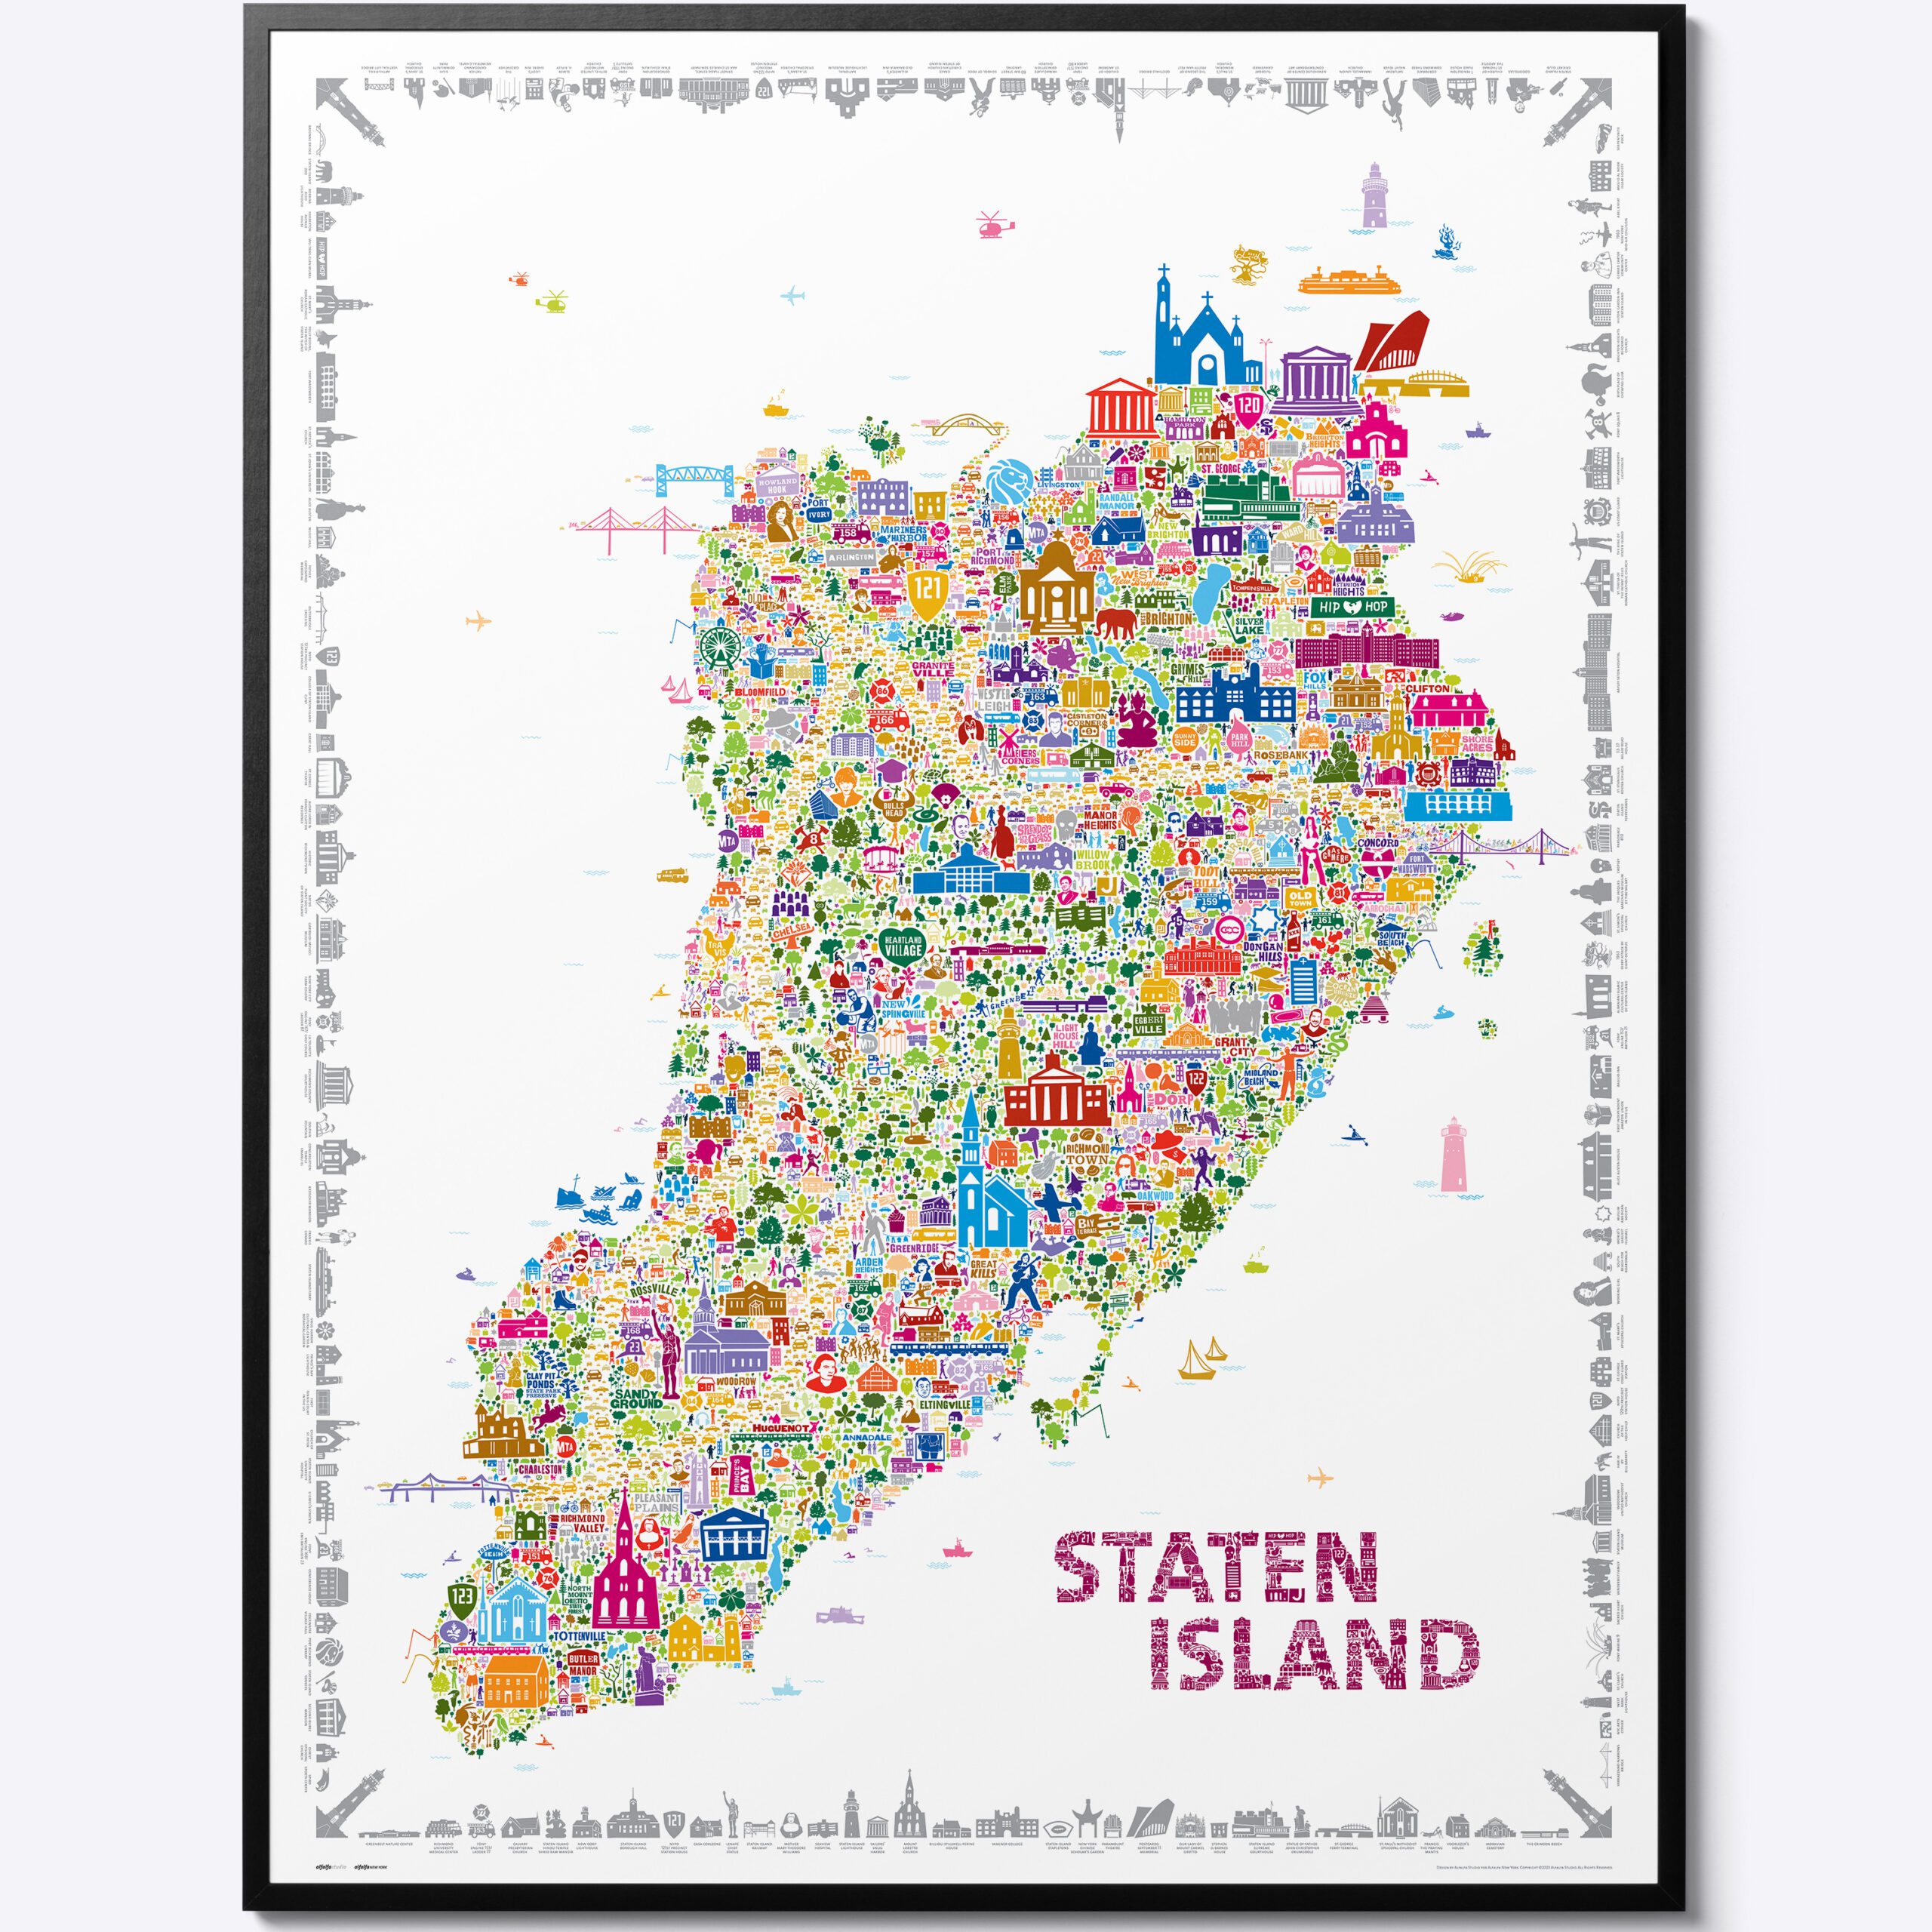 Iconic Staten Island Borough Large Poster Artwork for Home Office Walls Designer Map Wall Art Trendy Colorful Modern Vintage Decor Living Room Bedroom Kitchen Farmhouse Entryway Foyer NYC Aesthetic Style Perfect Gift Travel Souvenir Big Paper Print